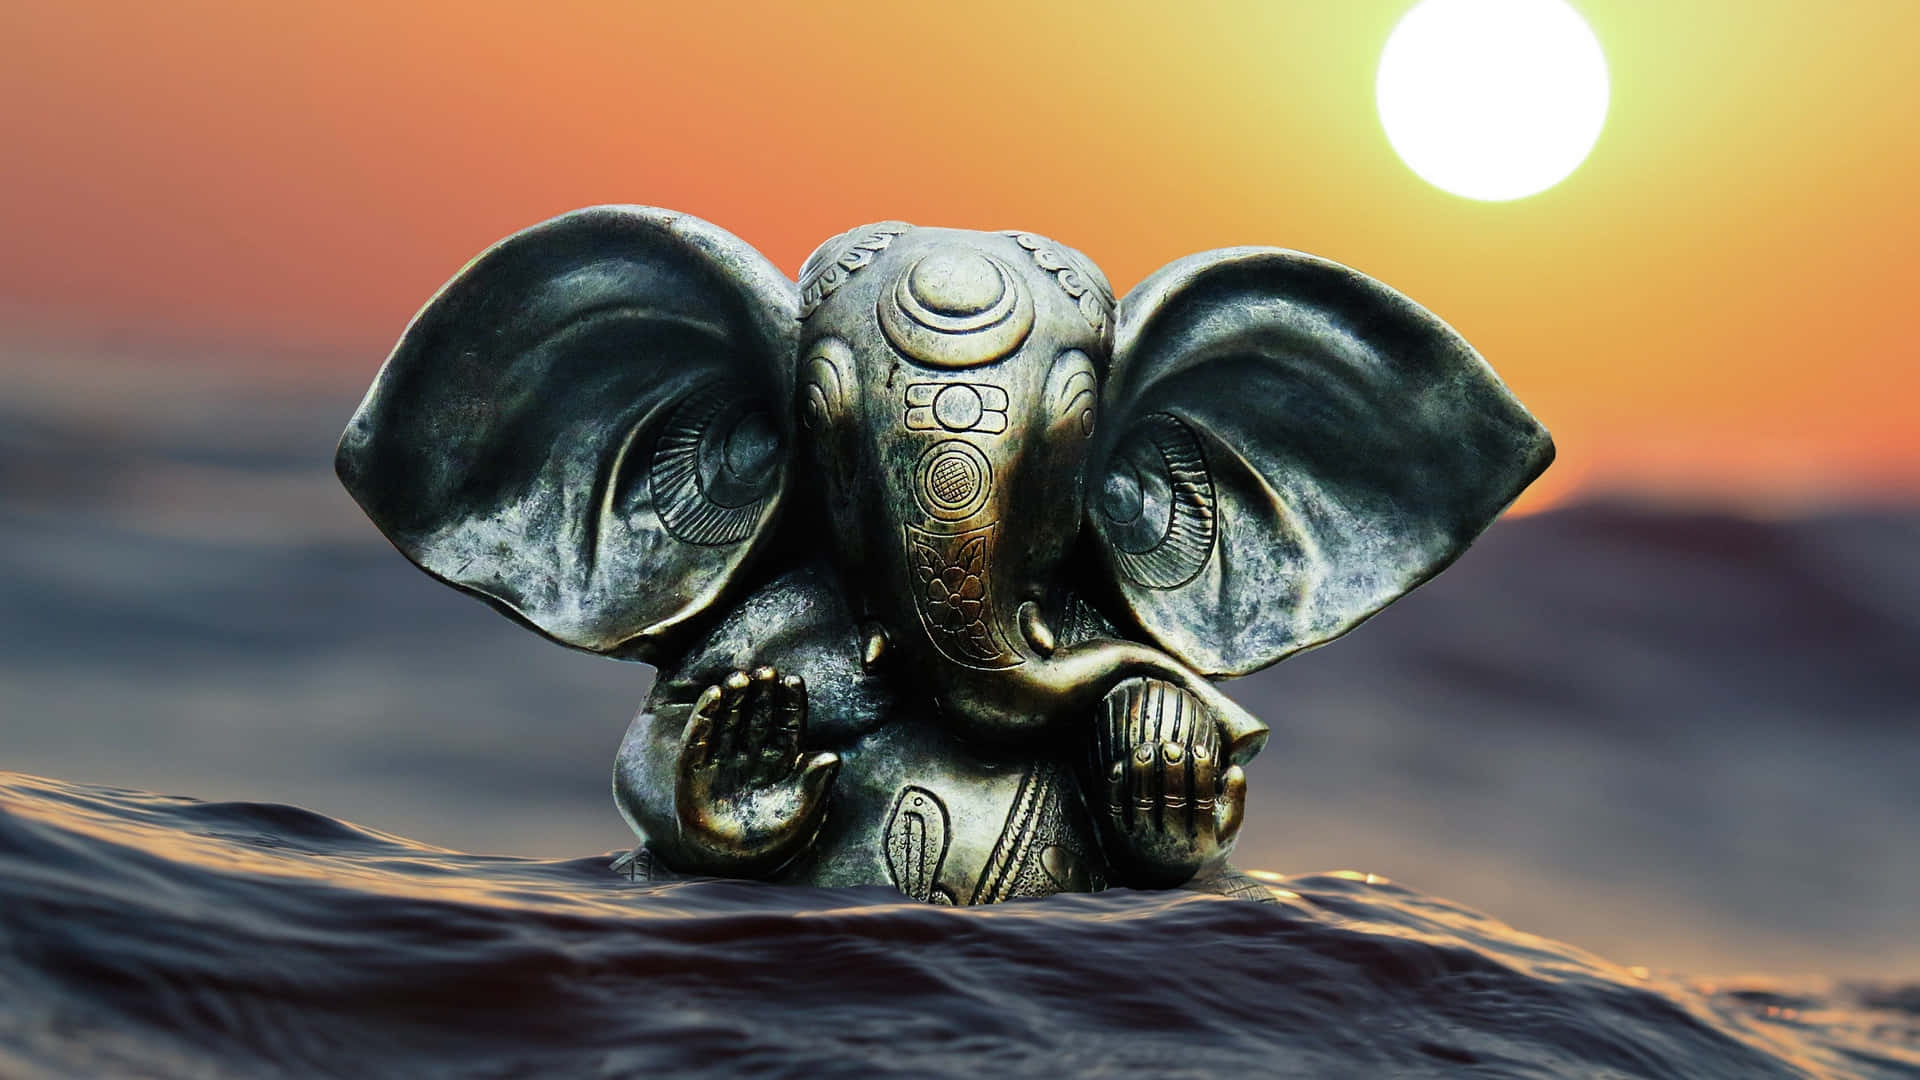 Lord Ganesha blessing us with knowledge, prosperity, and beautiful beginnings